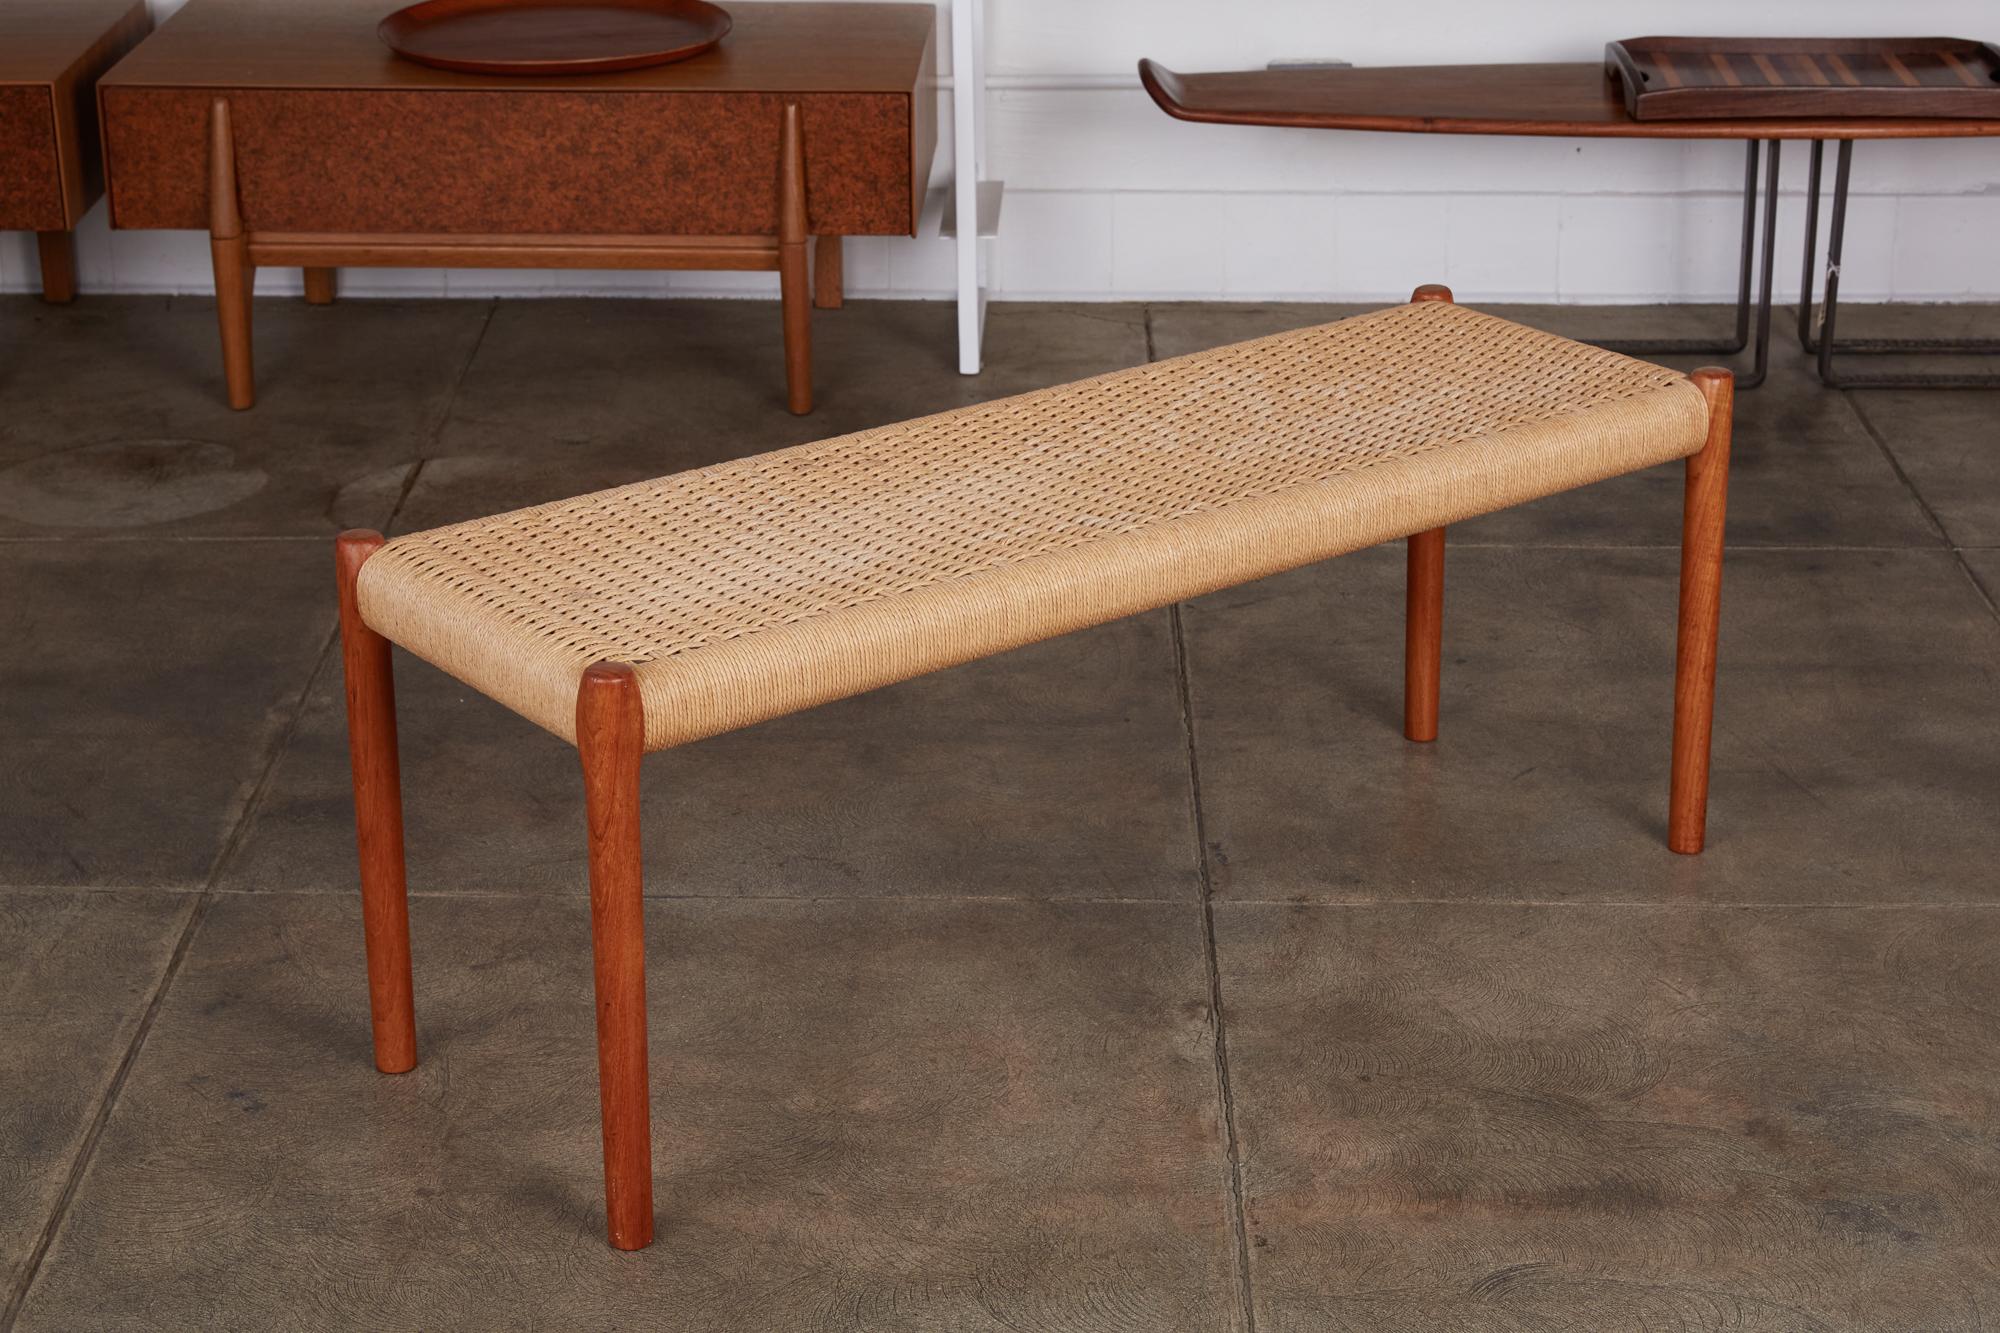 Niels Møller's teak and woven cord bench for his family’s company, JL Møllers Møbelfabrik, Denmark, circa 1960s. The bench features an oiled teak frame and legs with Danish cord upholstery. Danish cord three-ply, a twisted paper of superior strength